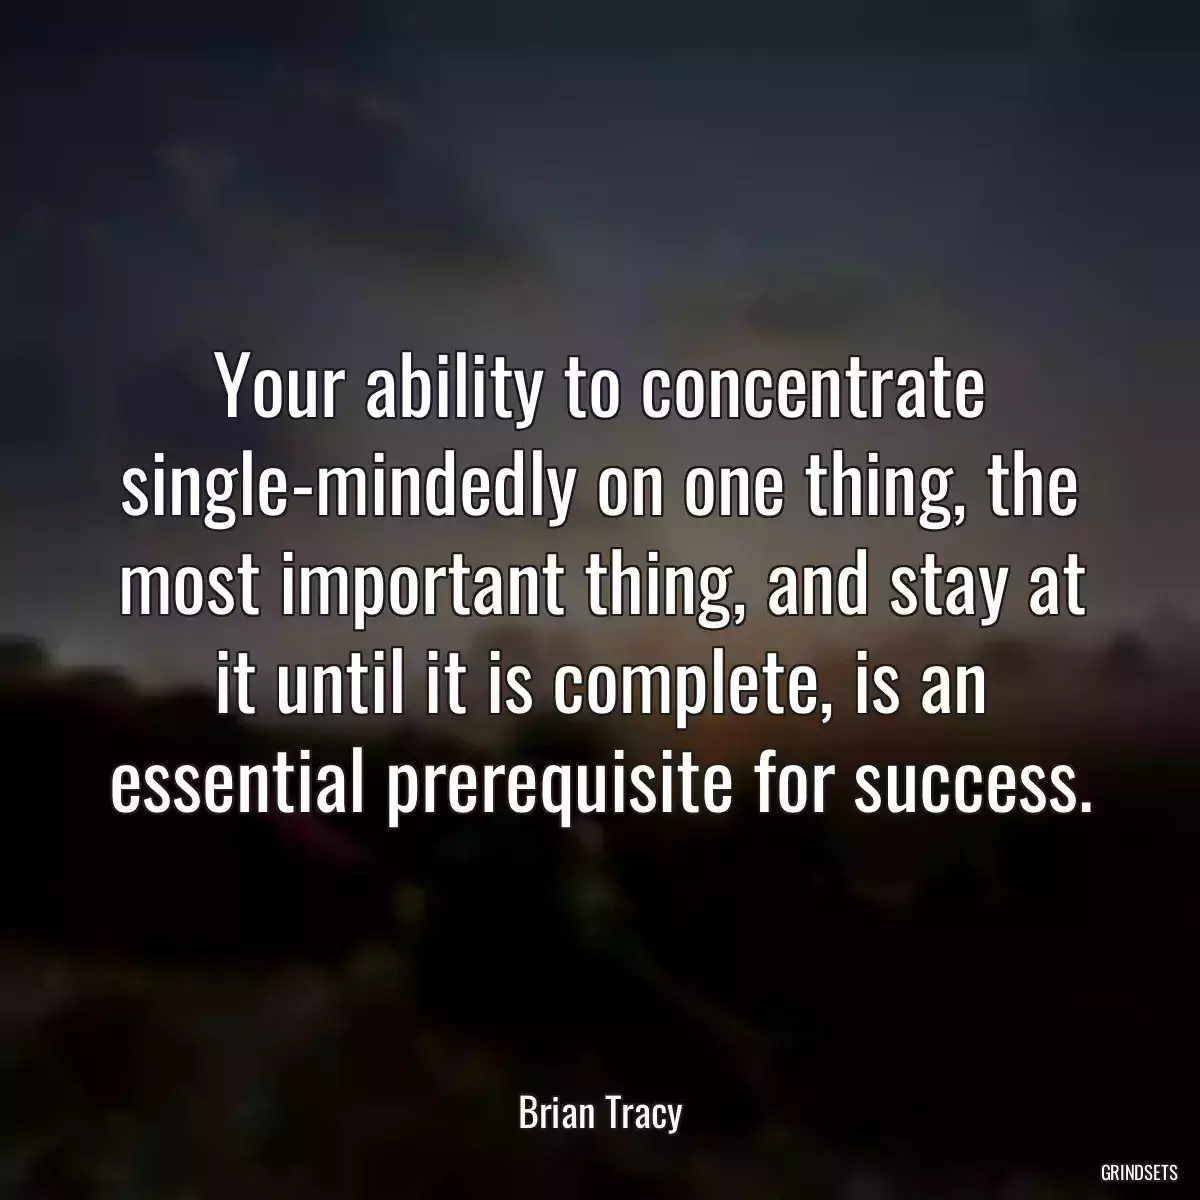 Your ability to concentrate single-mindedly on one thing, the most important thing, and stay at it until it is complete, is an essential prerequisite for success.